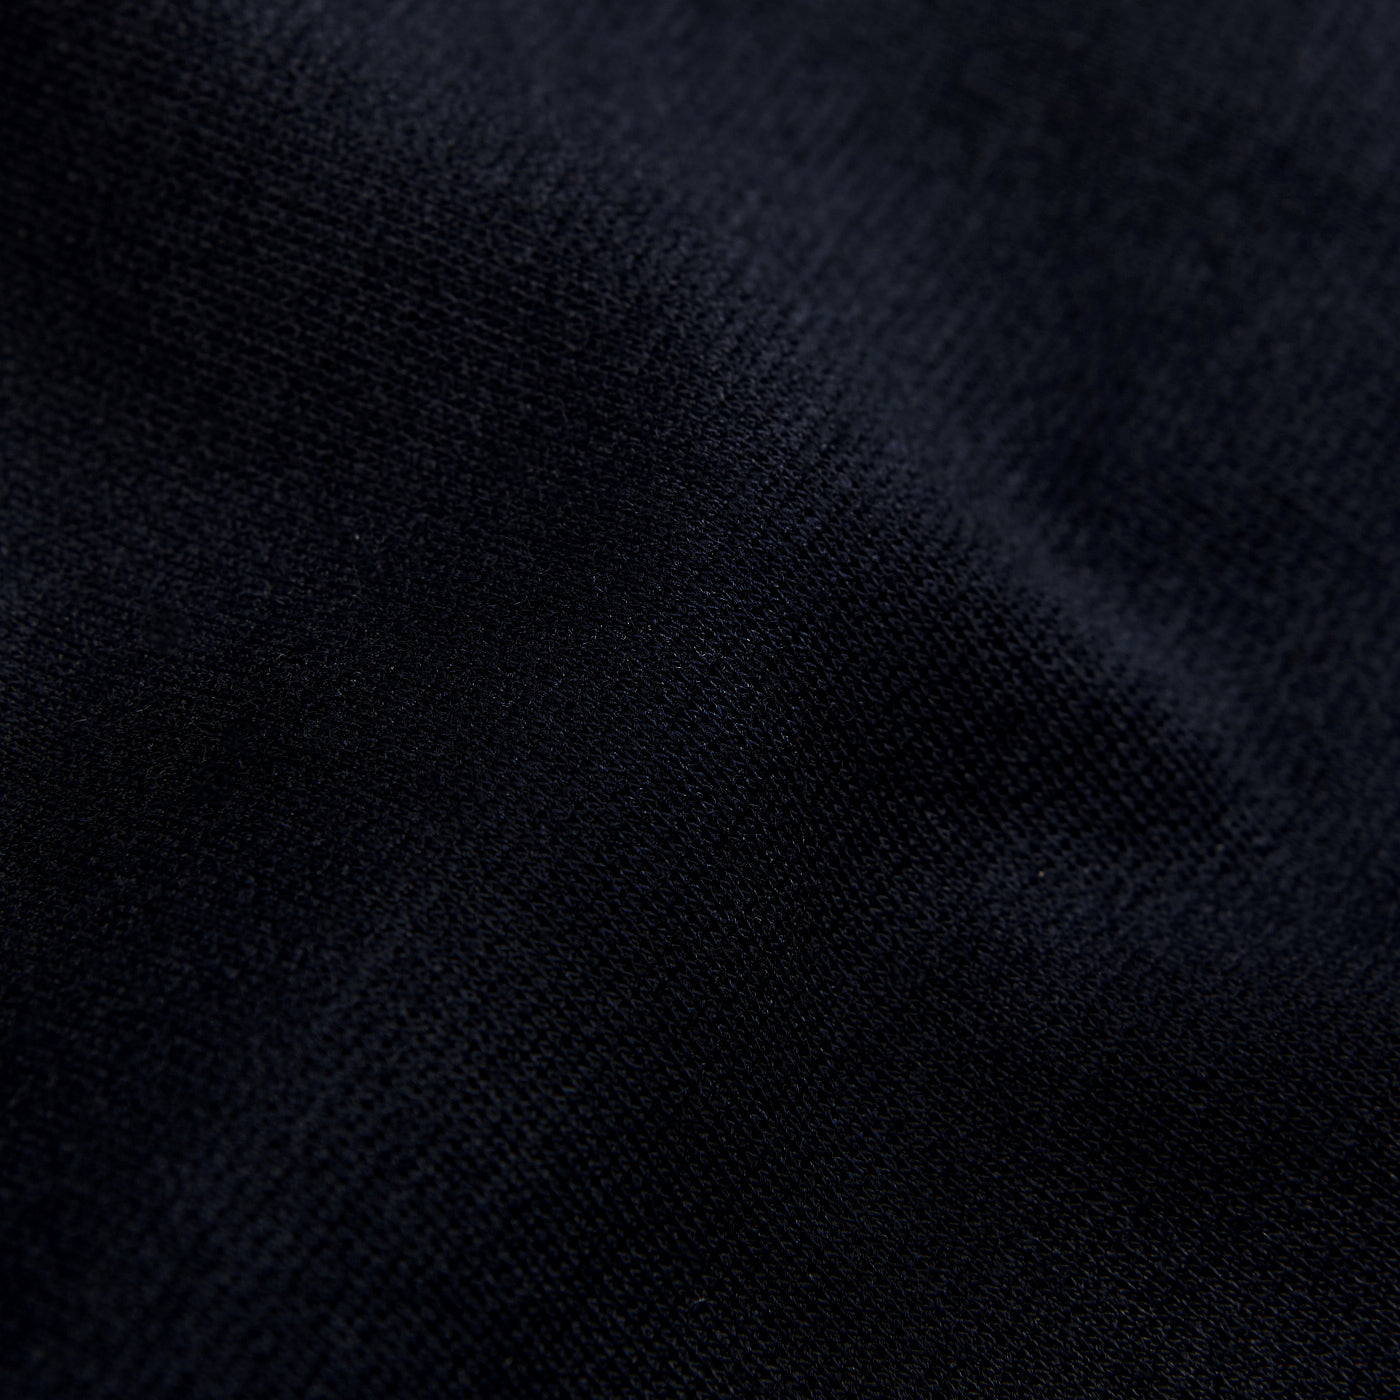 Canali Navy Cotton Jersey Unconstructed Blazer Fabric